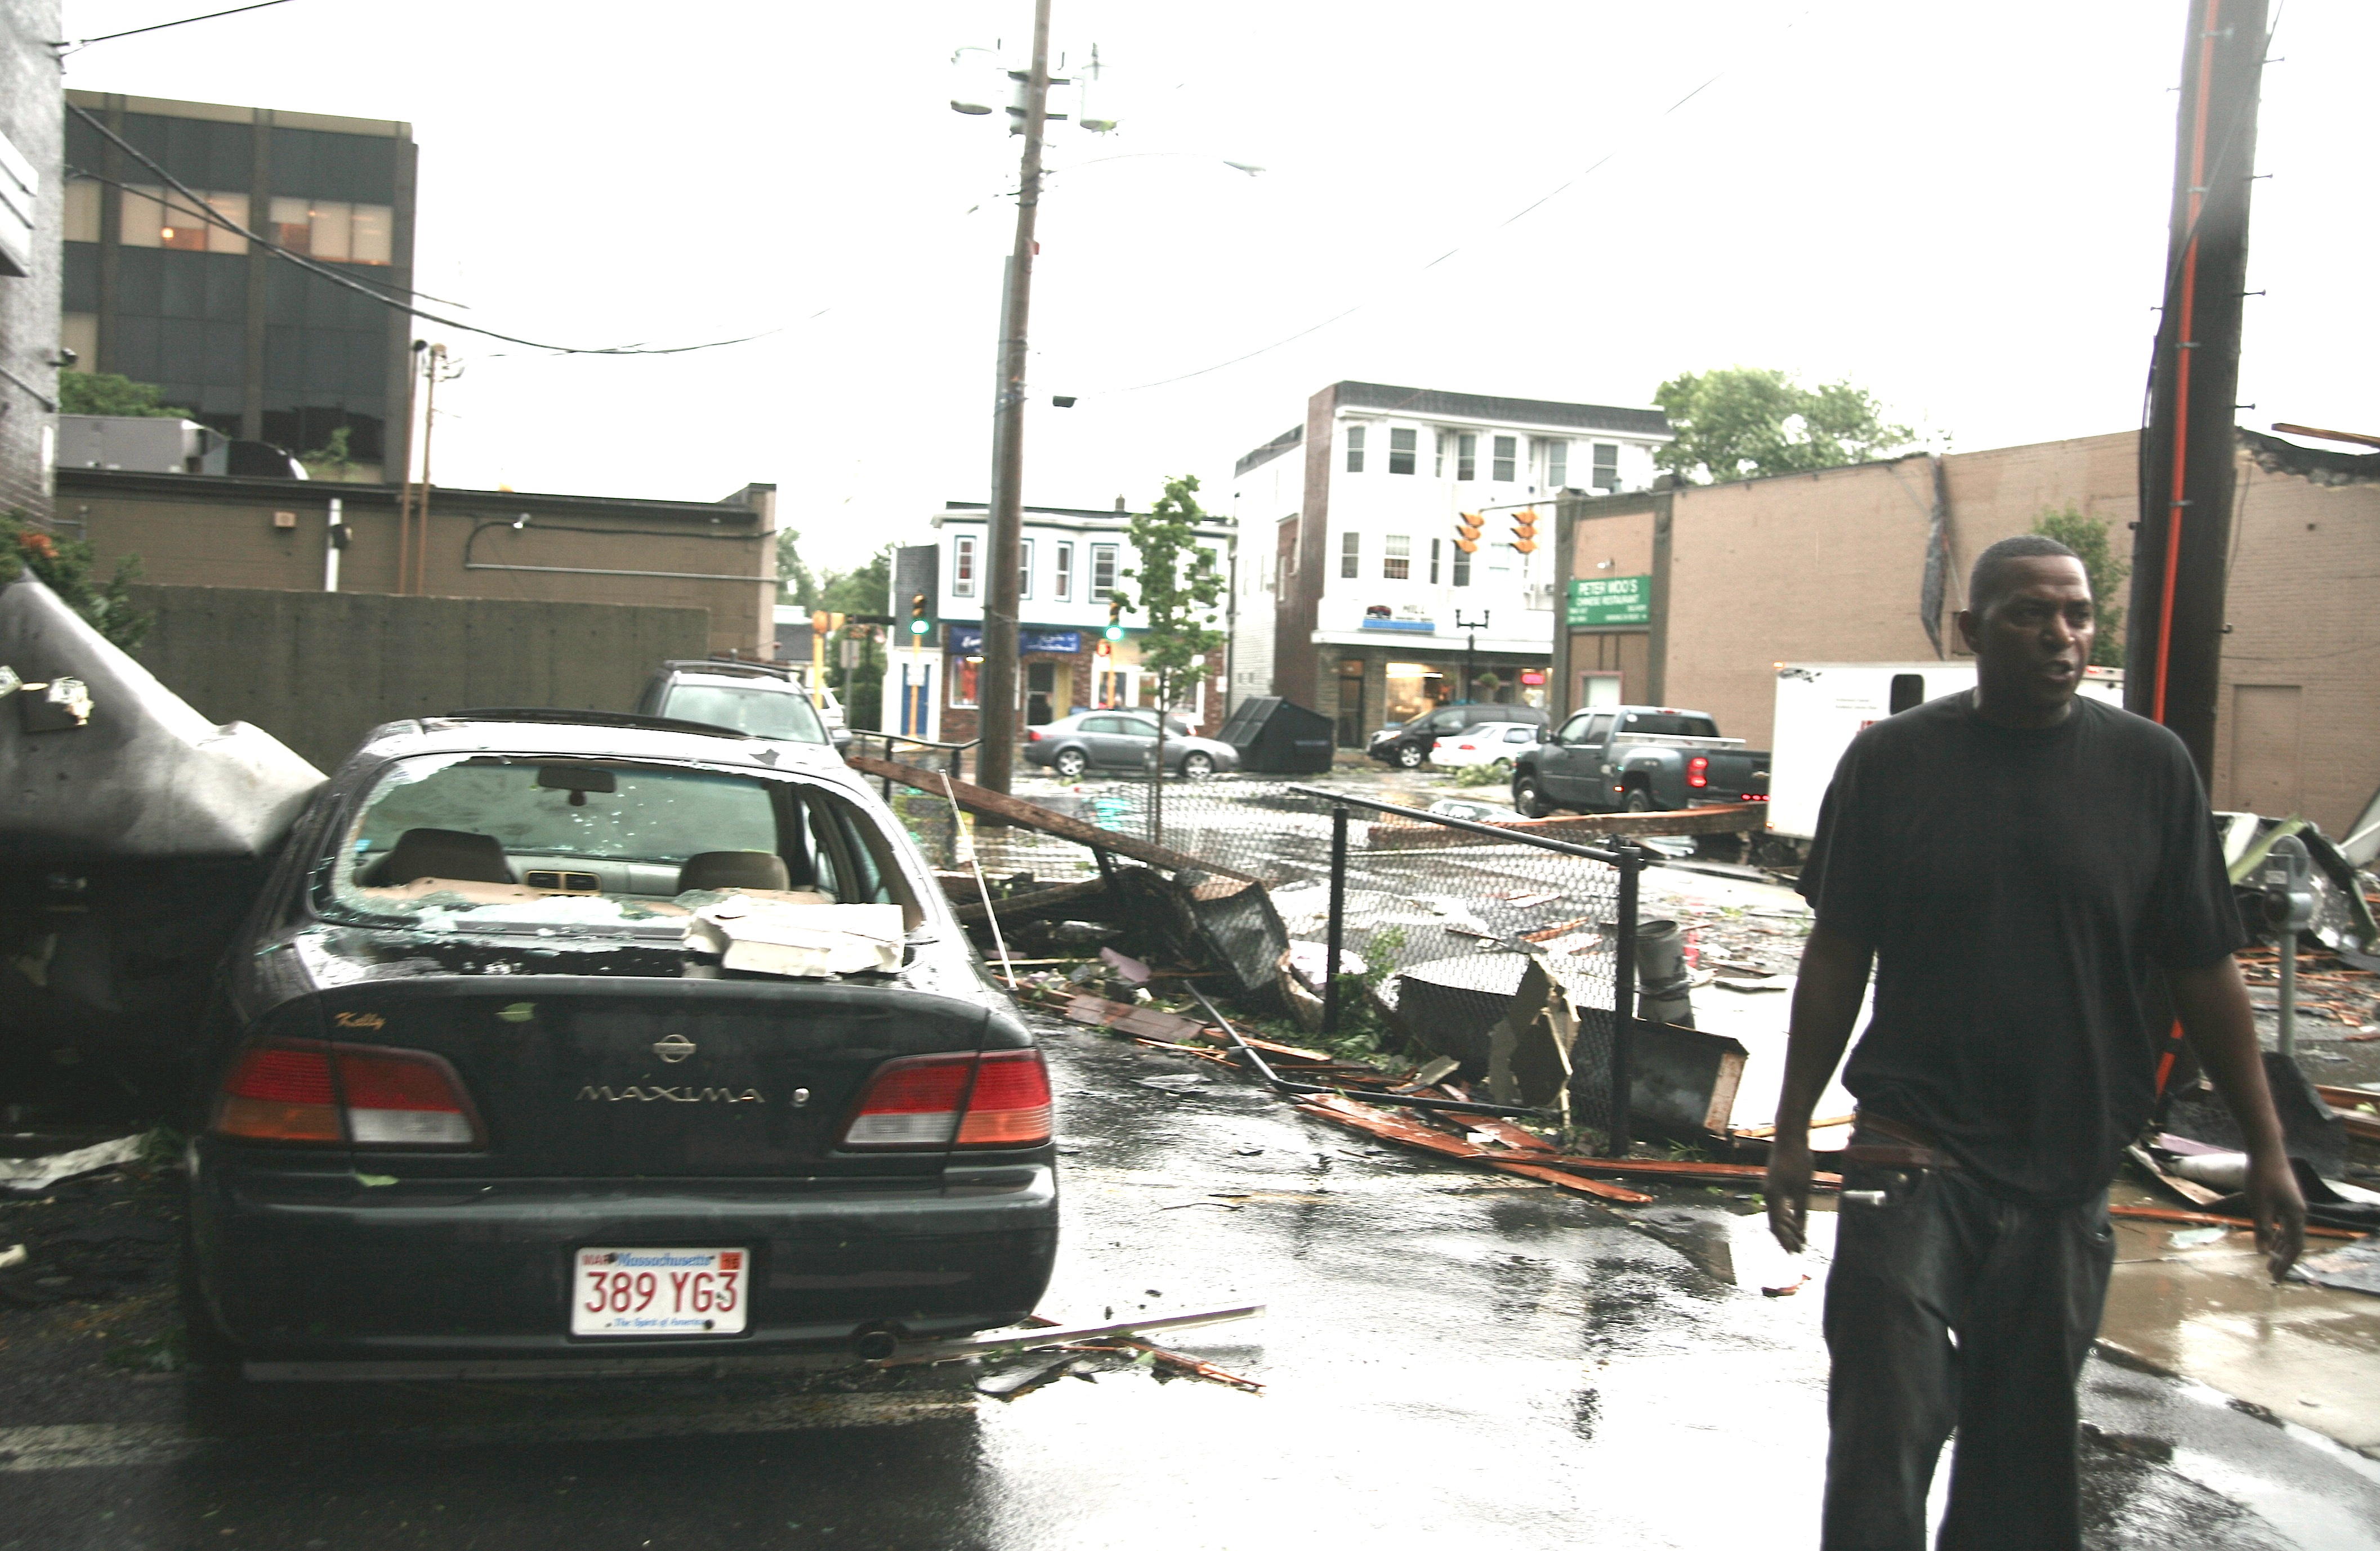 Victor Villena is shown here moments after the tornado passed through Park Avenue. He was in the black car to the left when the tornado struck. Large pieces of Peter Woo’s roof smashed onto his car as he sat inside. “I’m still shaking; it was terrifying,” he said.